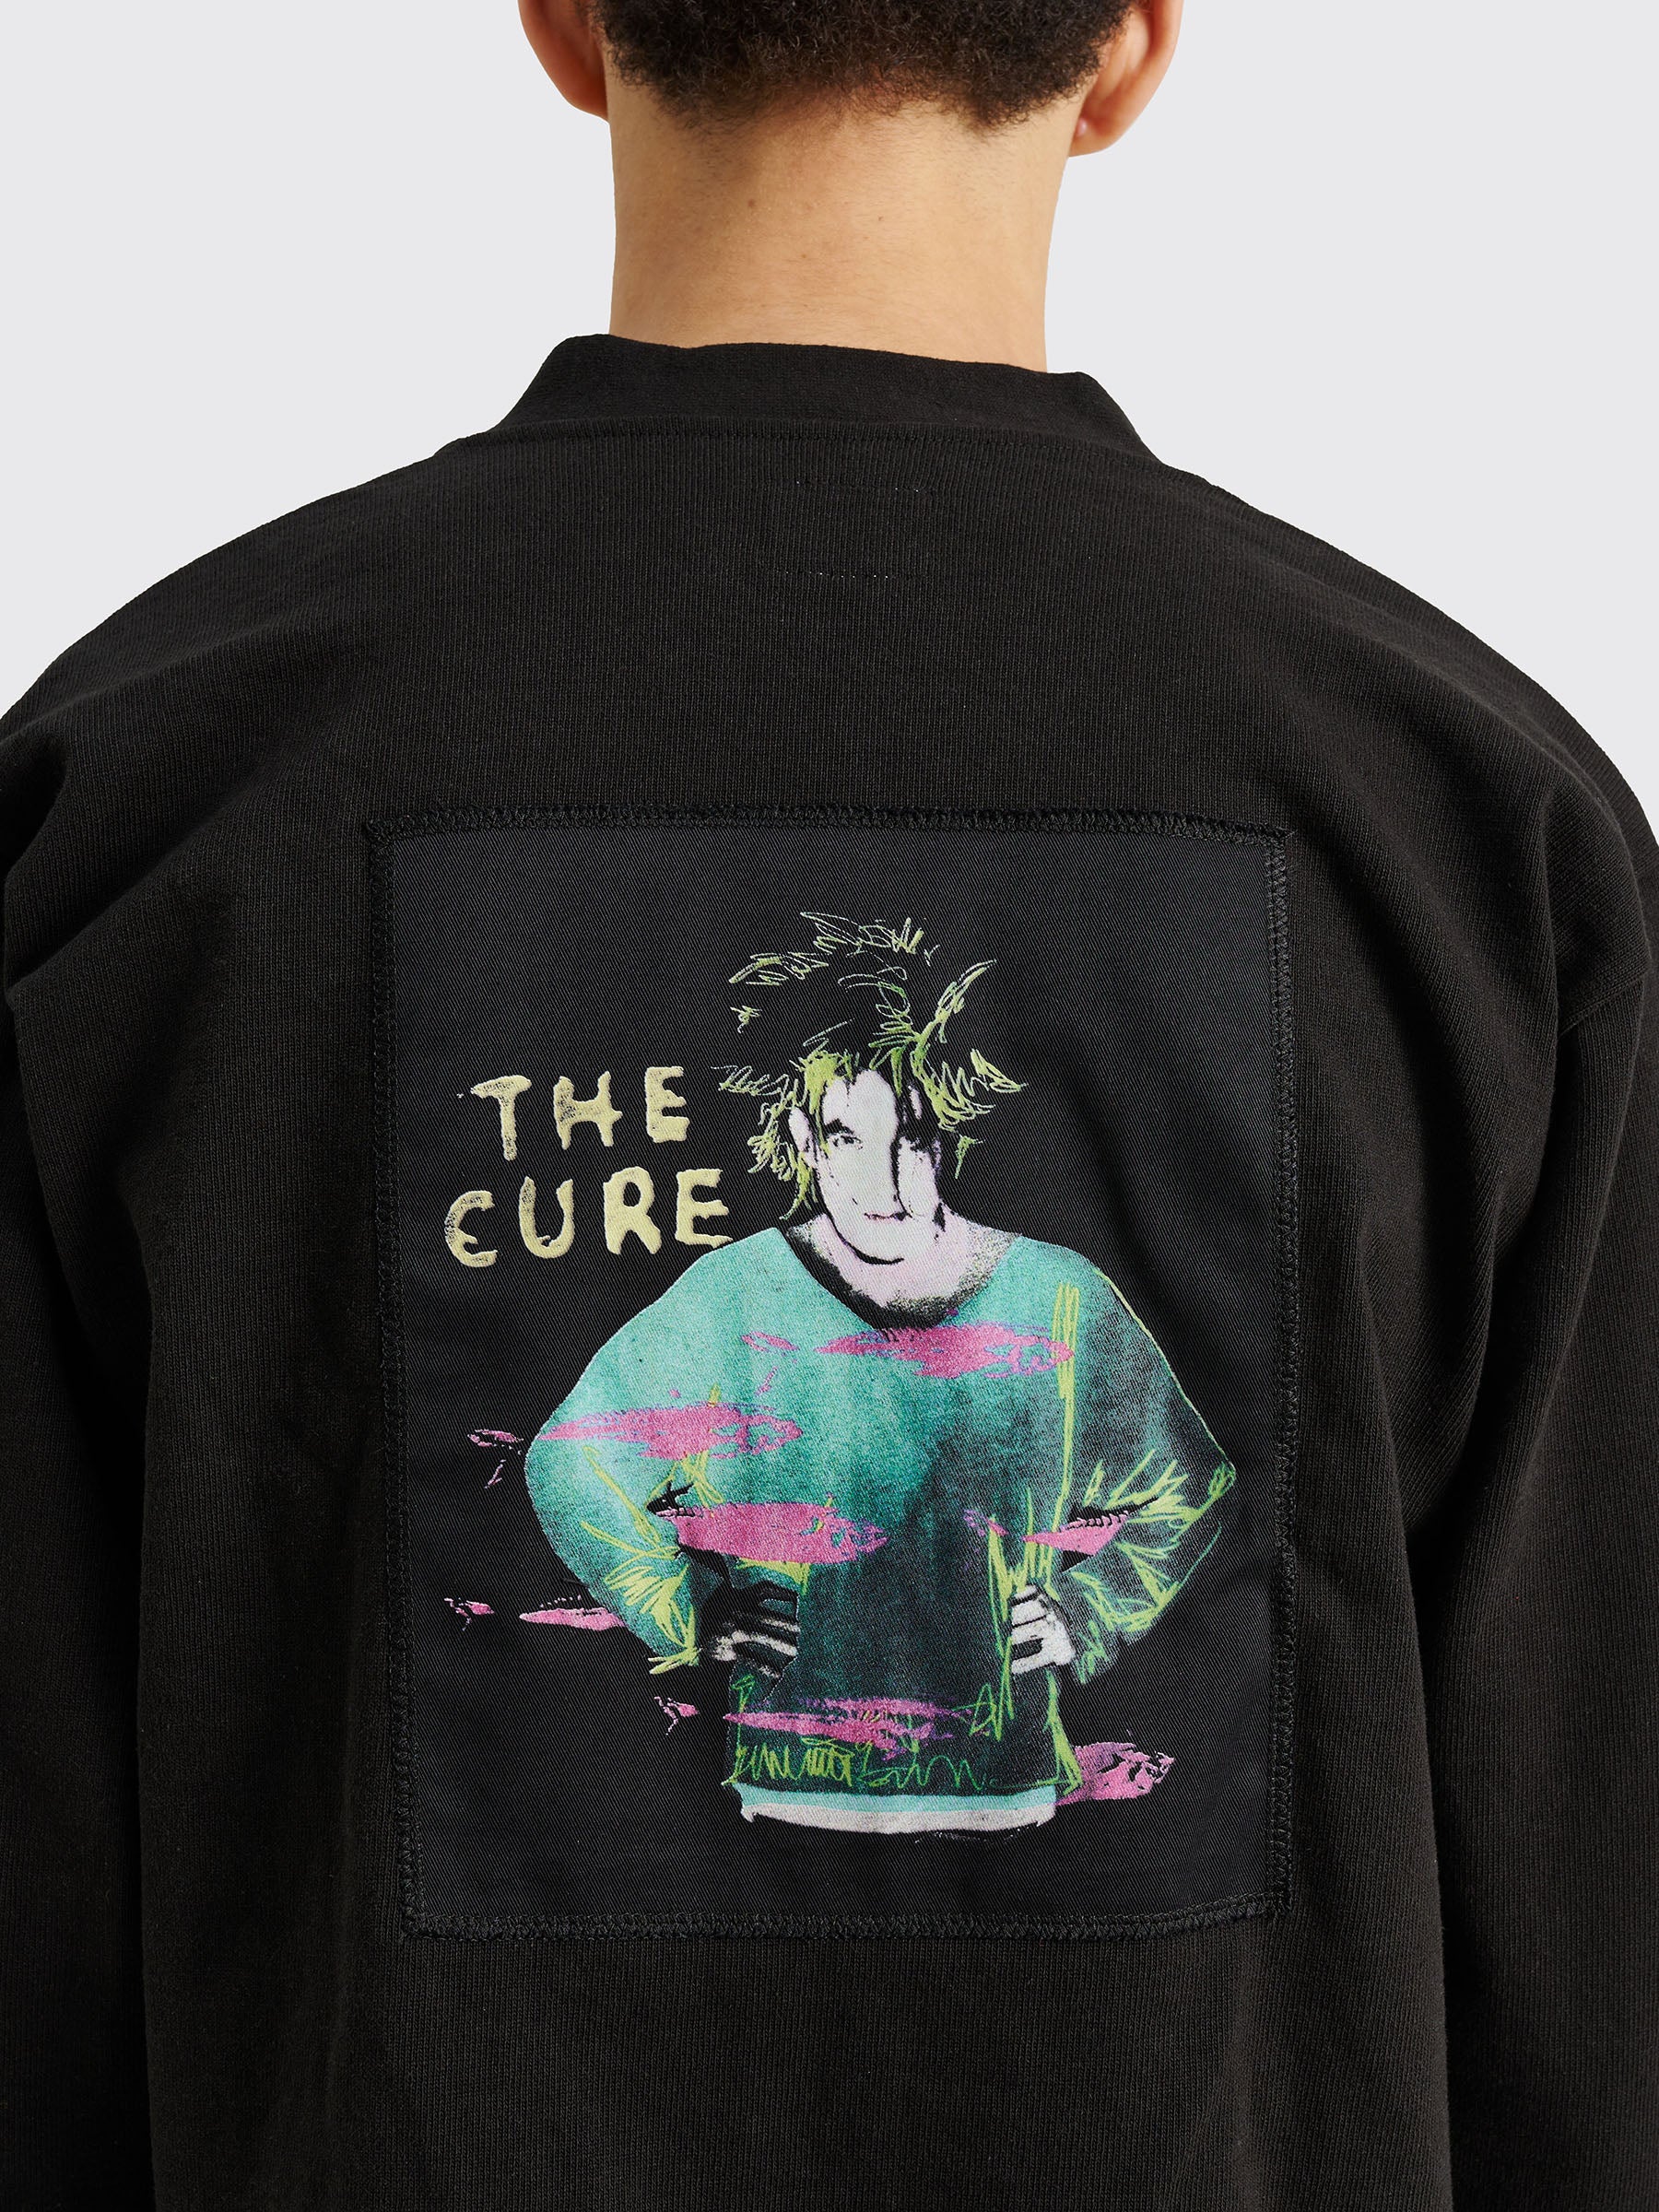 Noah x The Cure Rugby Cardigan Black